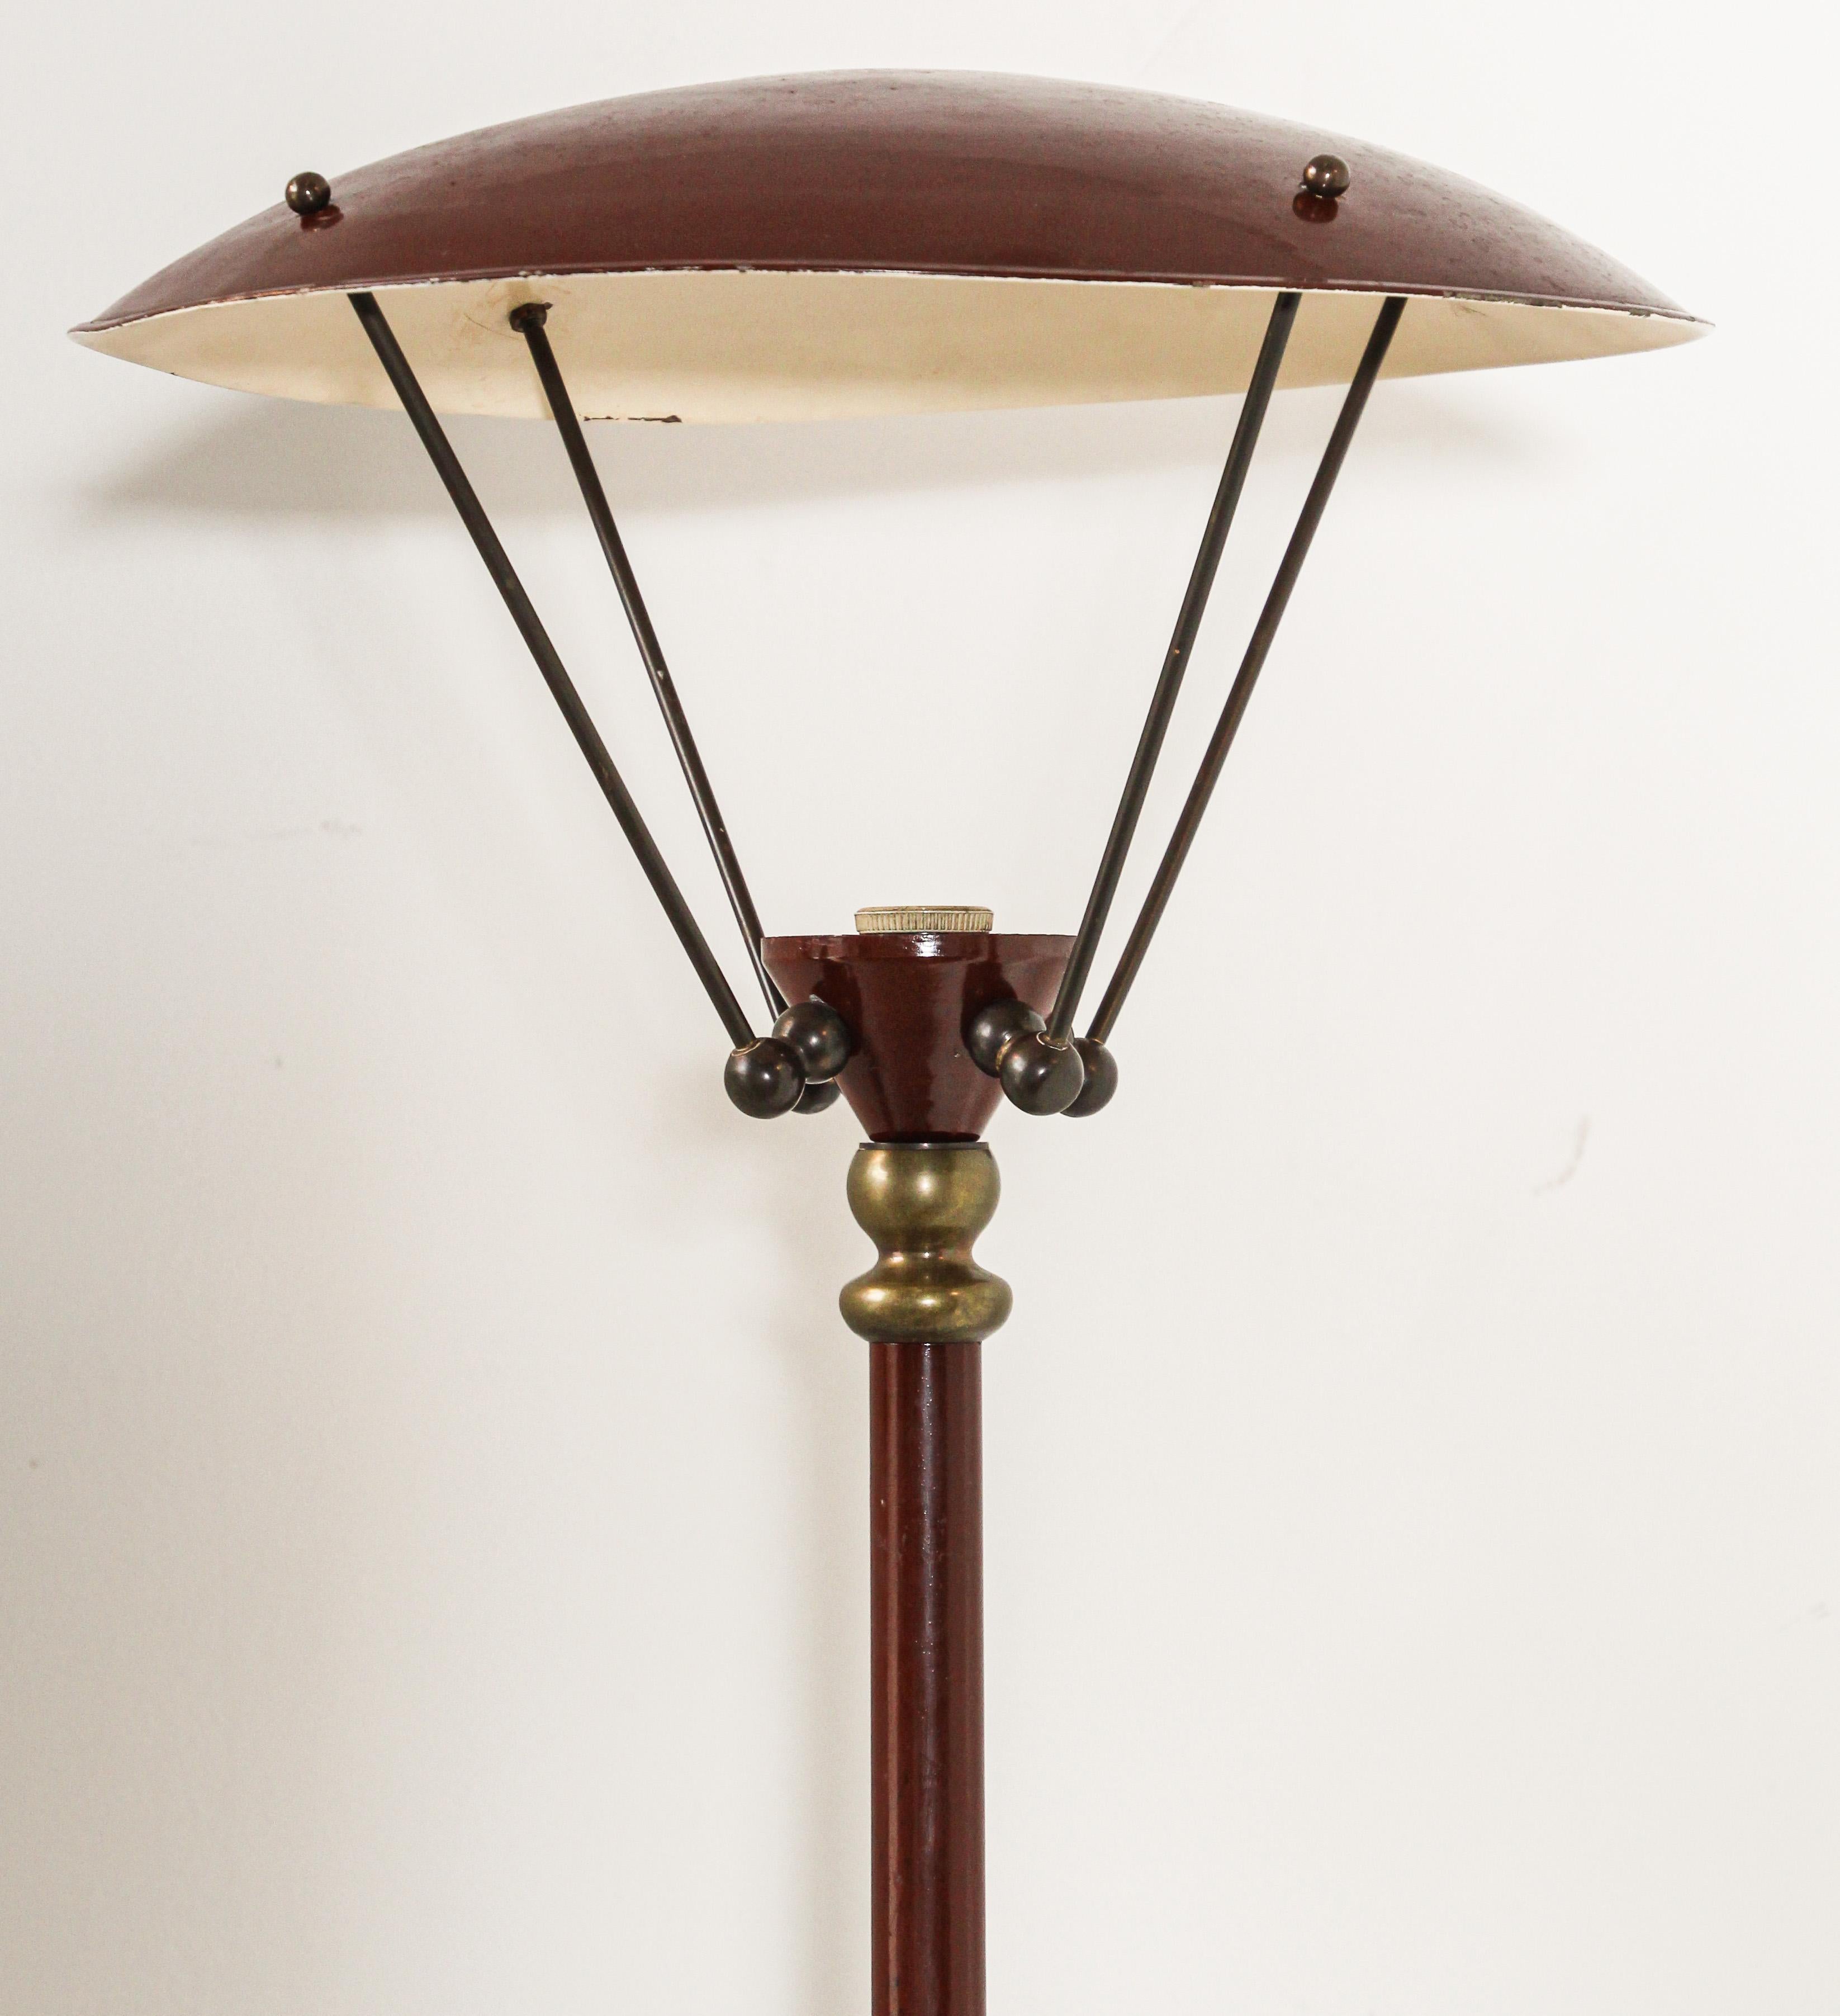 Vintage Sculptural French Tripod Floor Lamp Brown Enamel Shade, 1950s For Sale 10